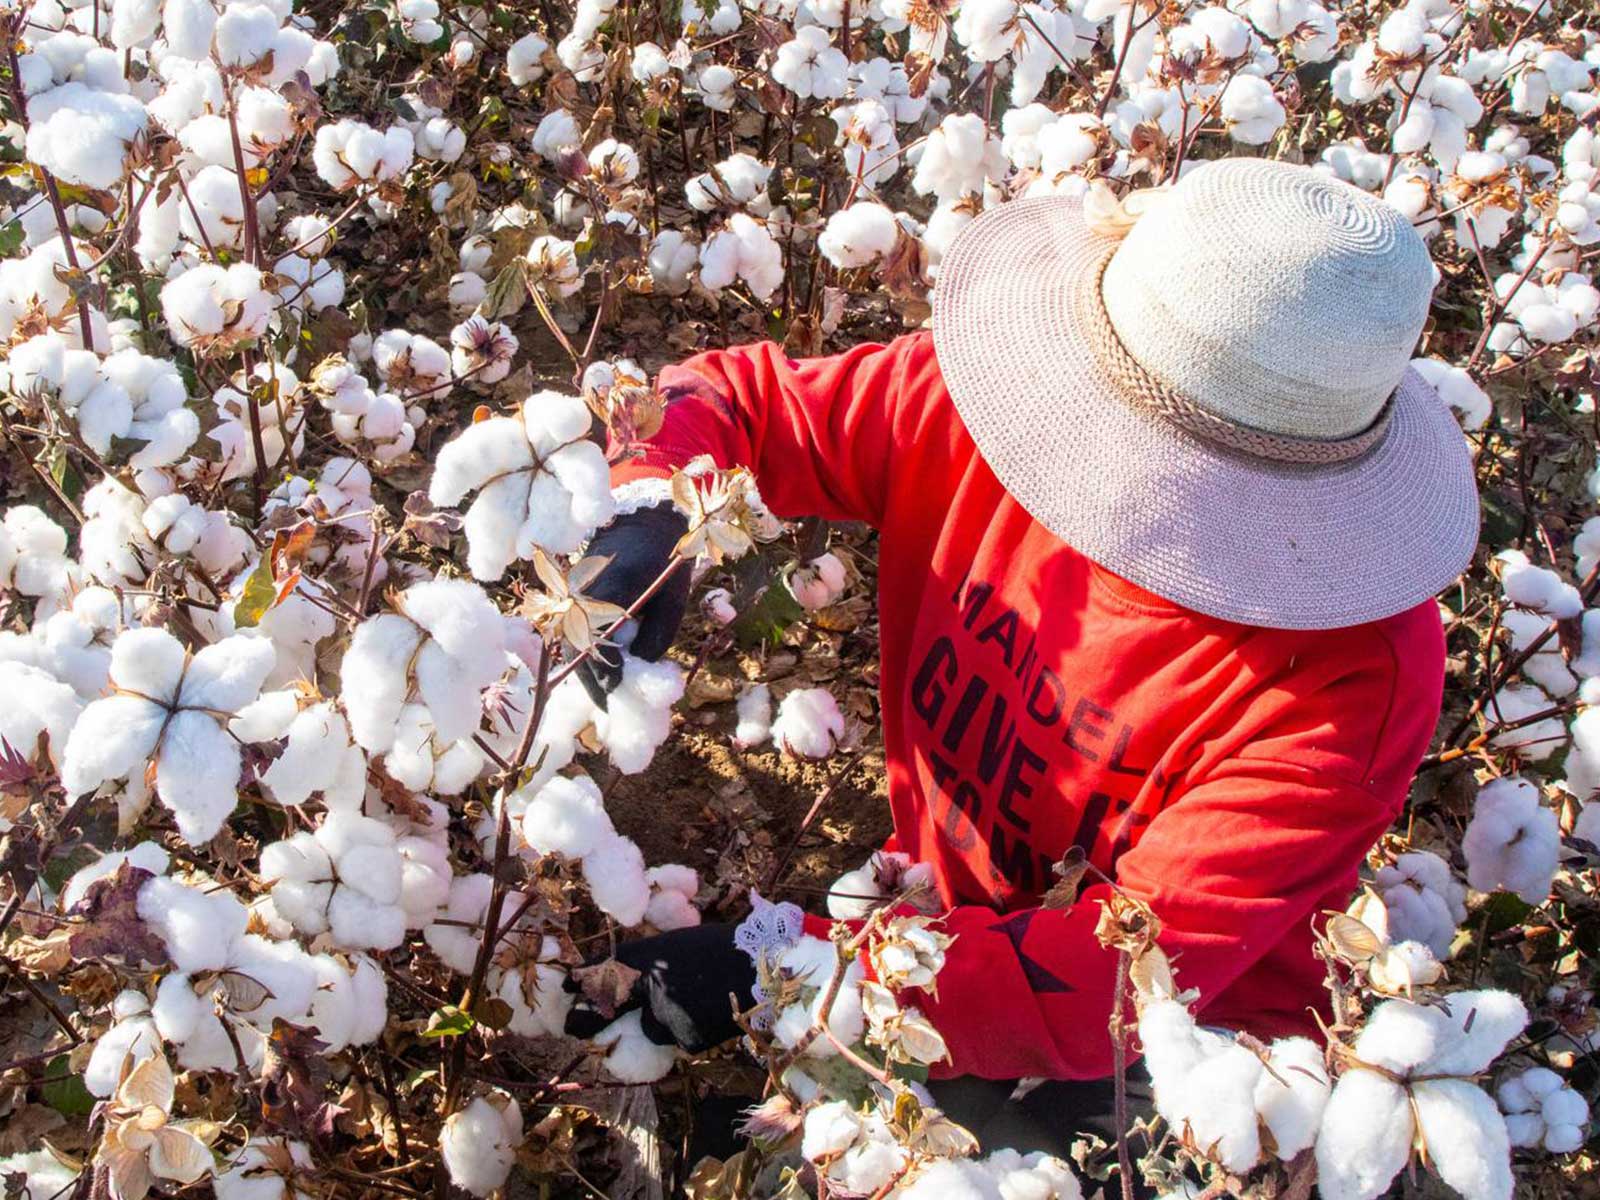 PCR tests arrive to trace cotton in garments